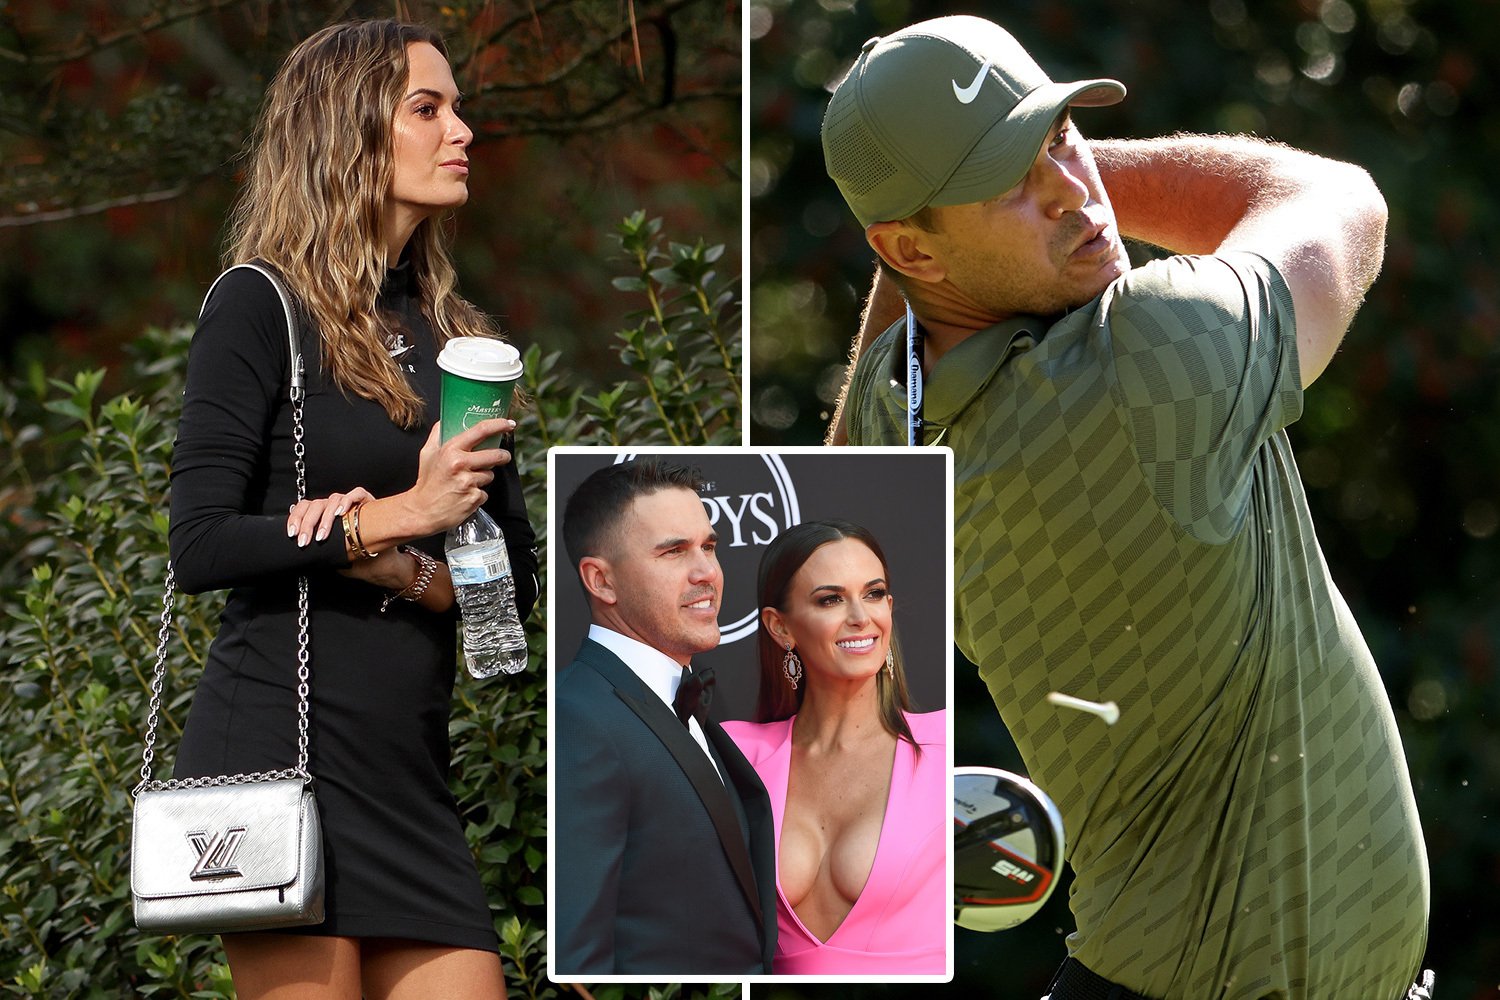 Jena Sims rocks Louis Vuitton bag while cheering her man Koepka on at Masters